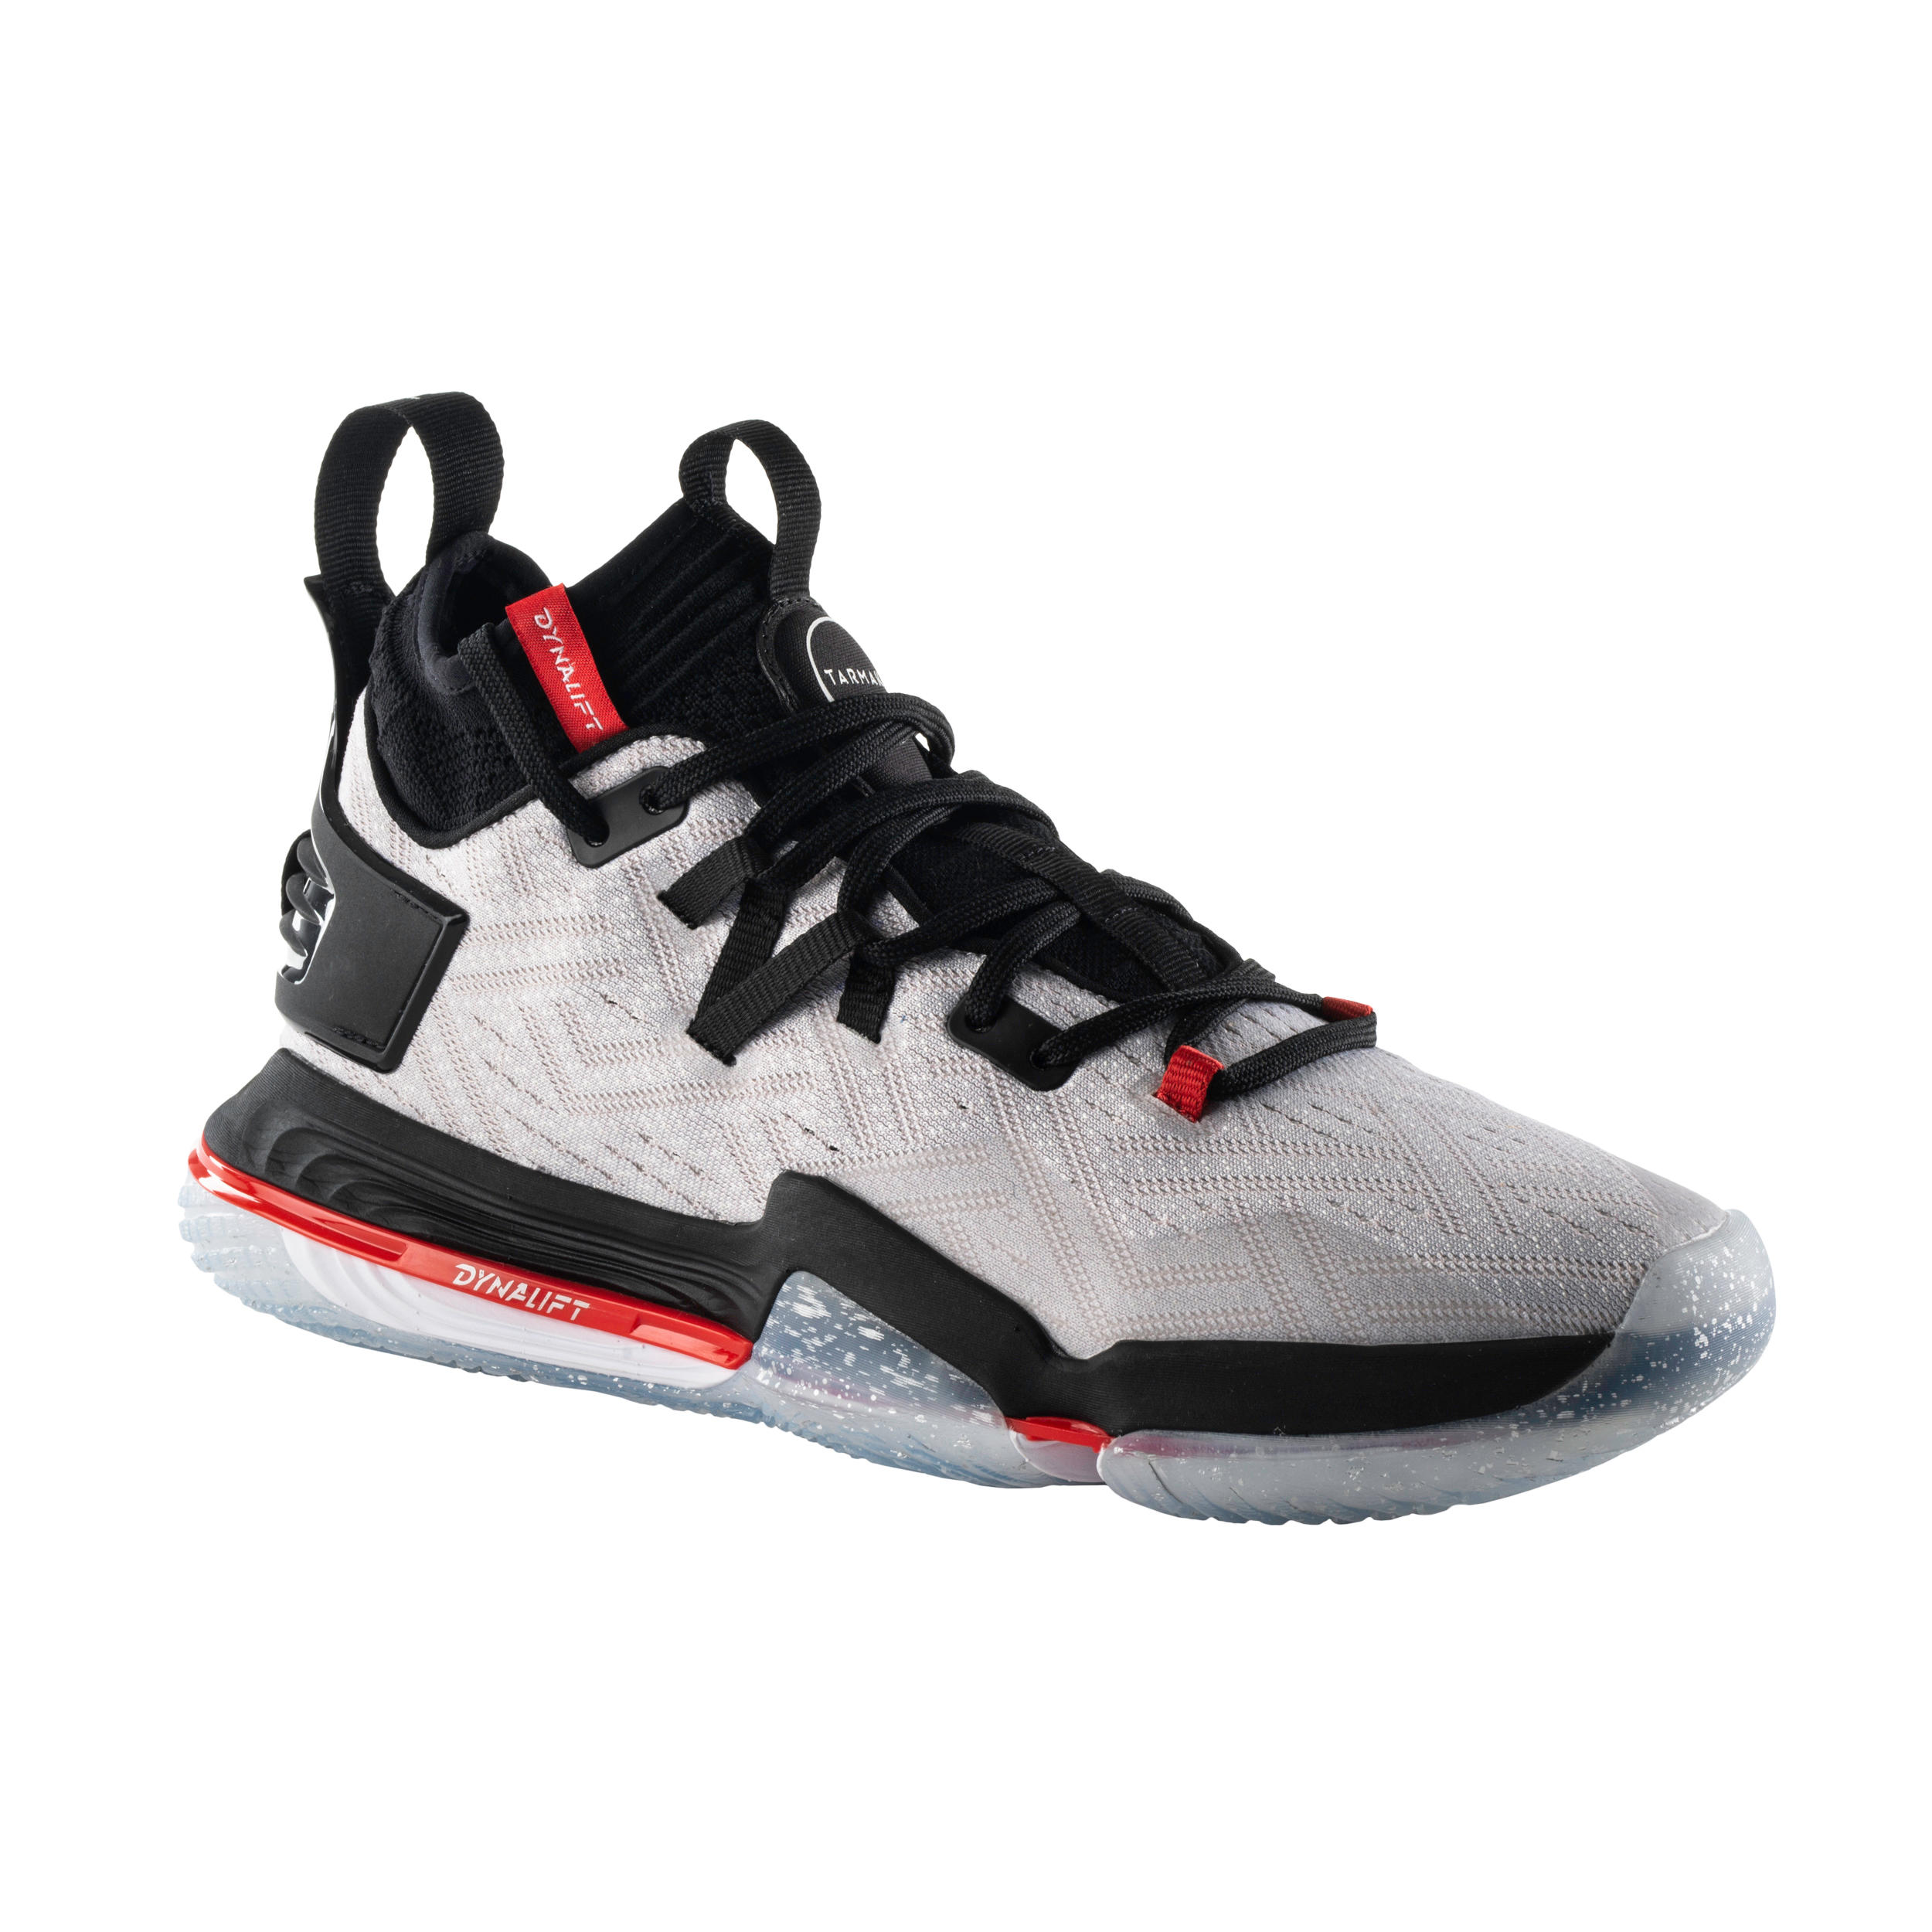 Elevate 900 Mid-Rise Basketball Shoes 